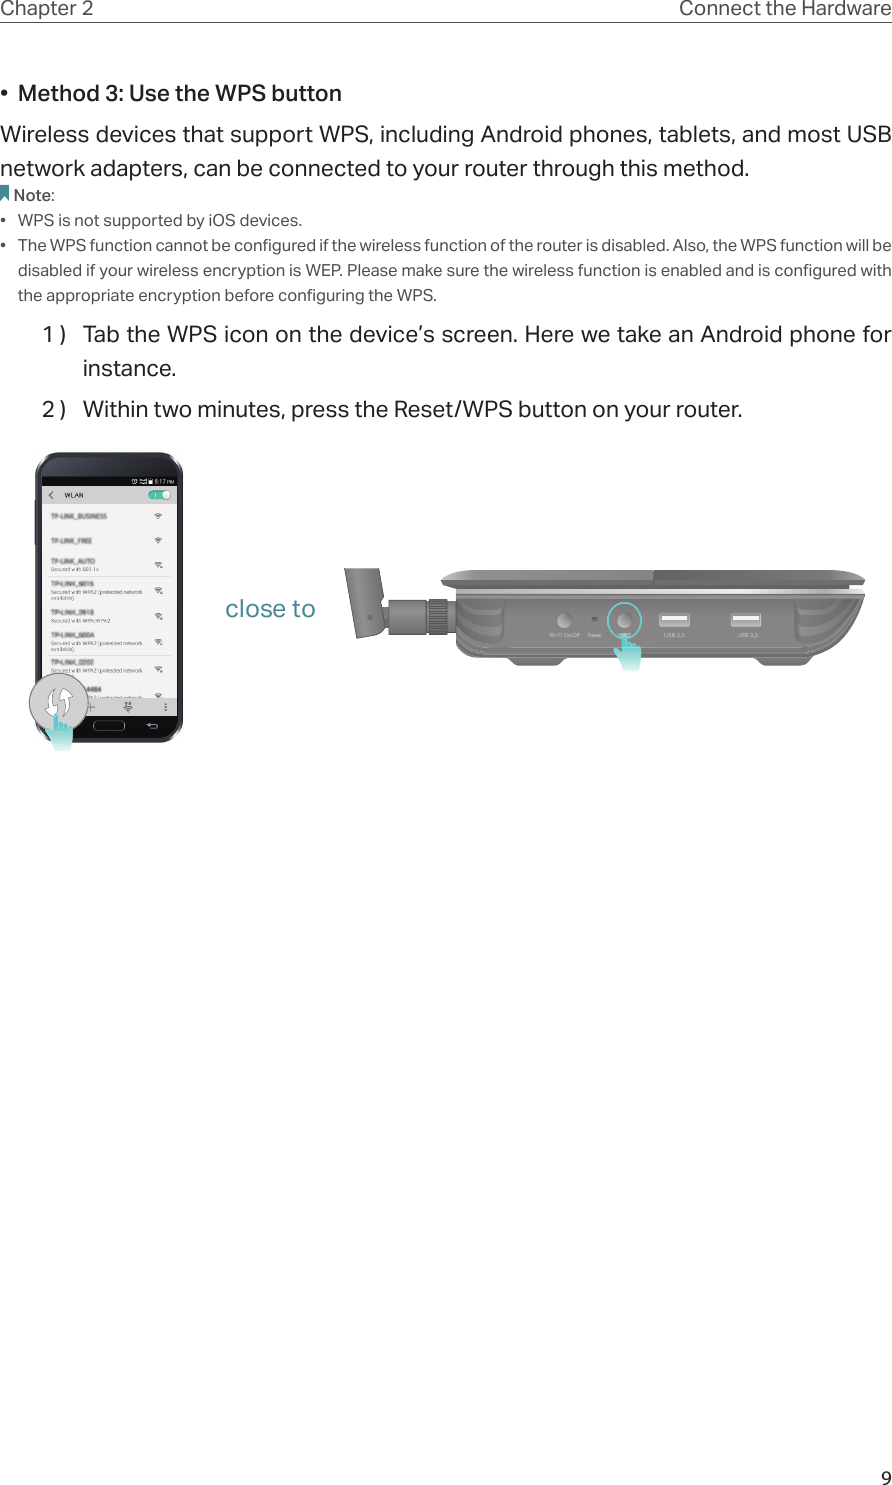 9Chapter 2 Connect the Hardware•  Method 3: Use the WPS buttonWireless devices that support WPS, including Android phones, tablets, and most USB network adapters, can be connected to your router through this method.Note:•  WPS is not supported by iOS devices.•  The WPS function cannot be configured if the wireless function of the router is disabled. Also, the WPS function will be disabled if your wireless encryption is WEP. Please make sure the wireless function is enabled and is configured with the appropriate encryption before configuring the WPS.1 )  Tab the WPS icon on the device’s screen. Here we take an Android phone for instance.2 )  Within two minutes, press the Reset/WPS button on your router. close to